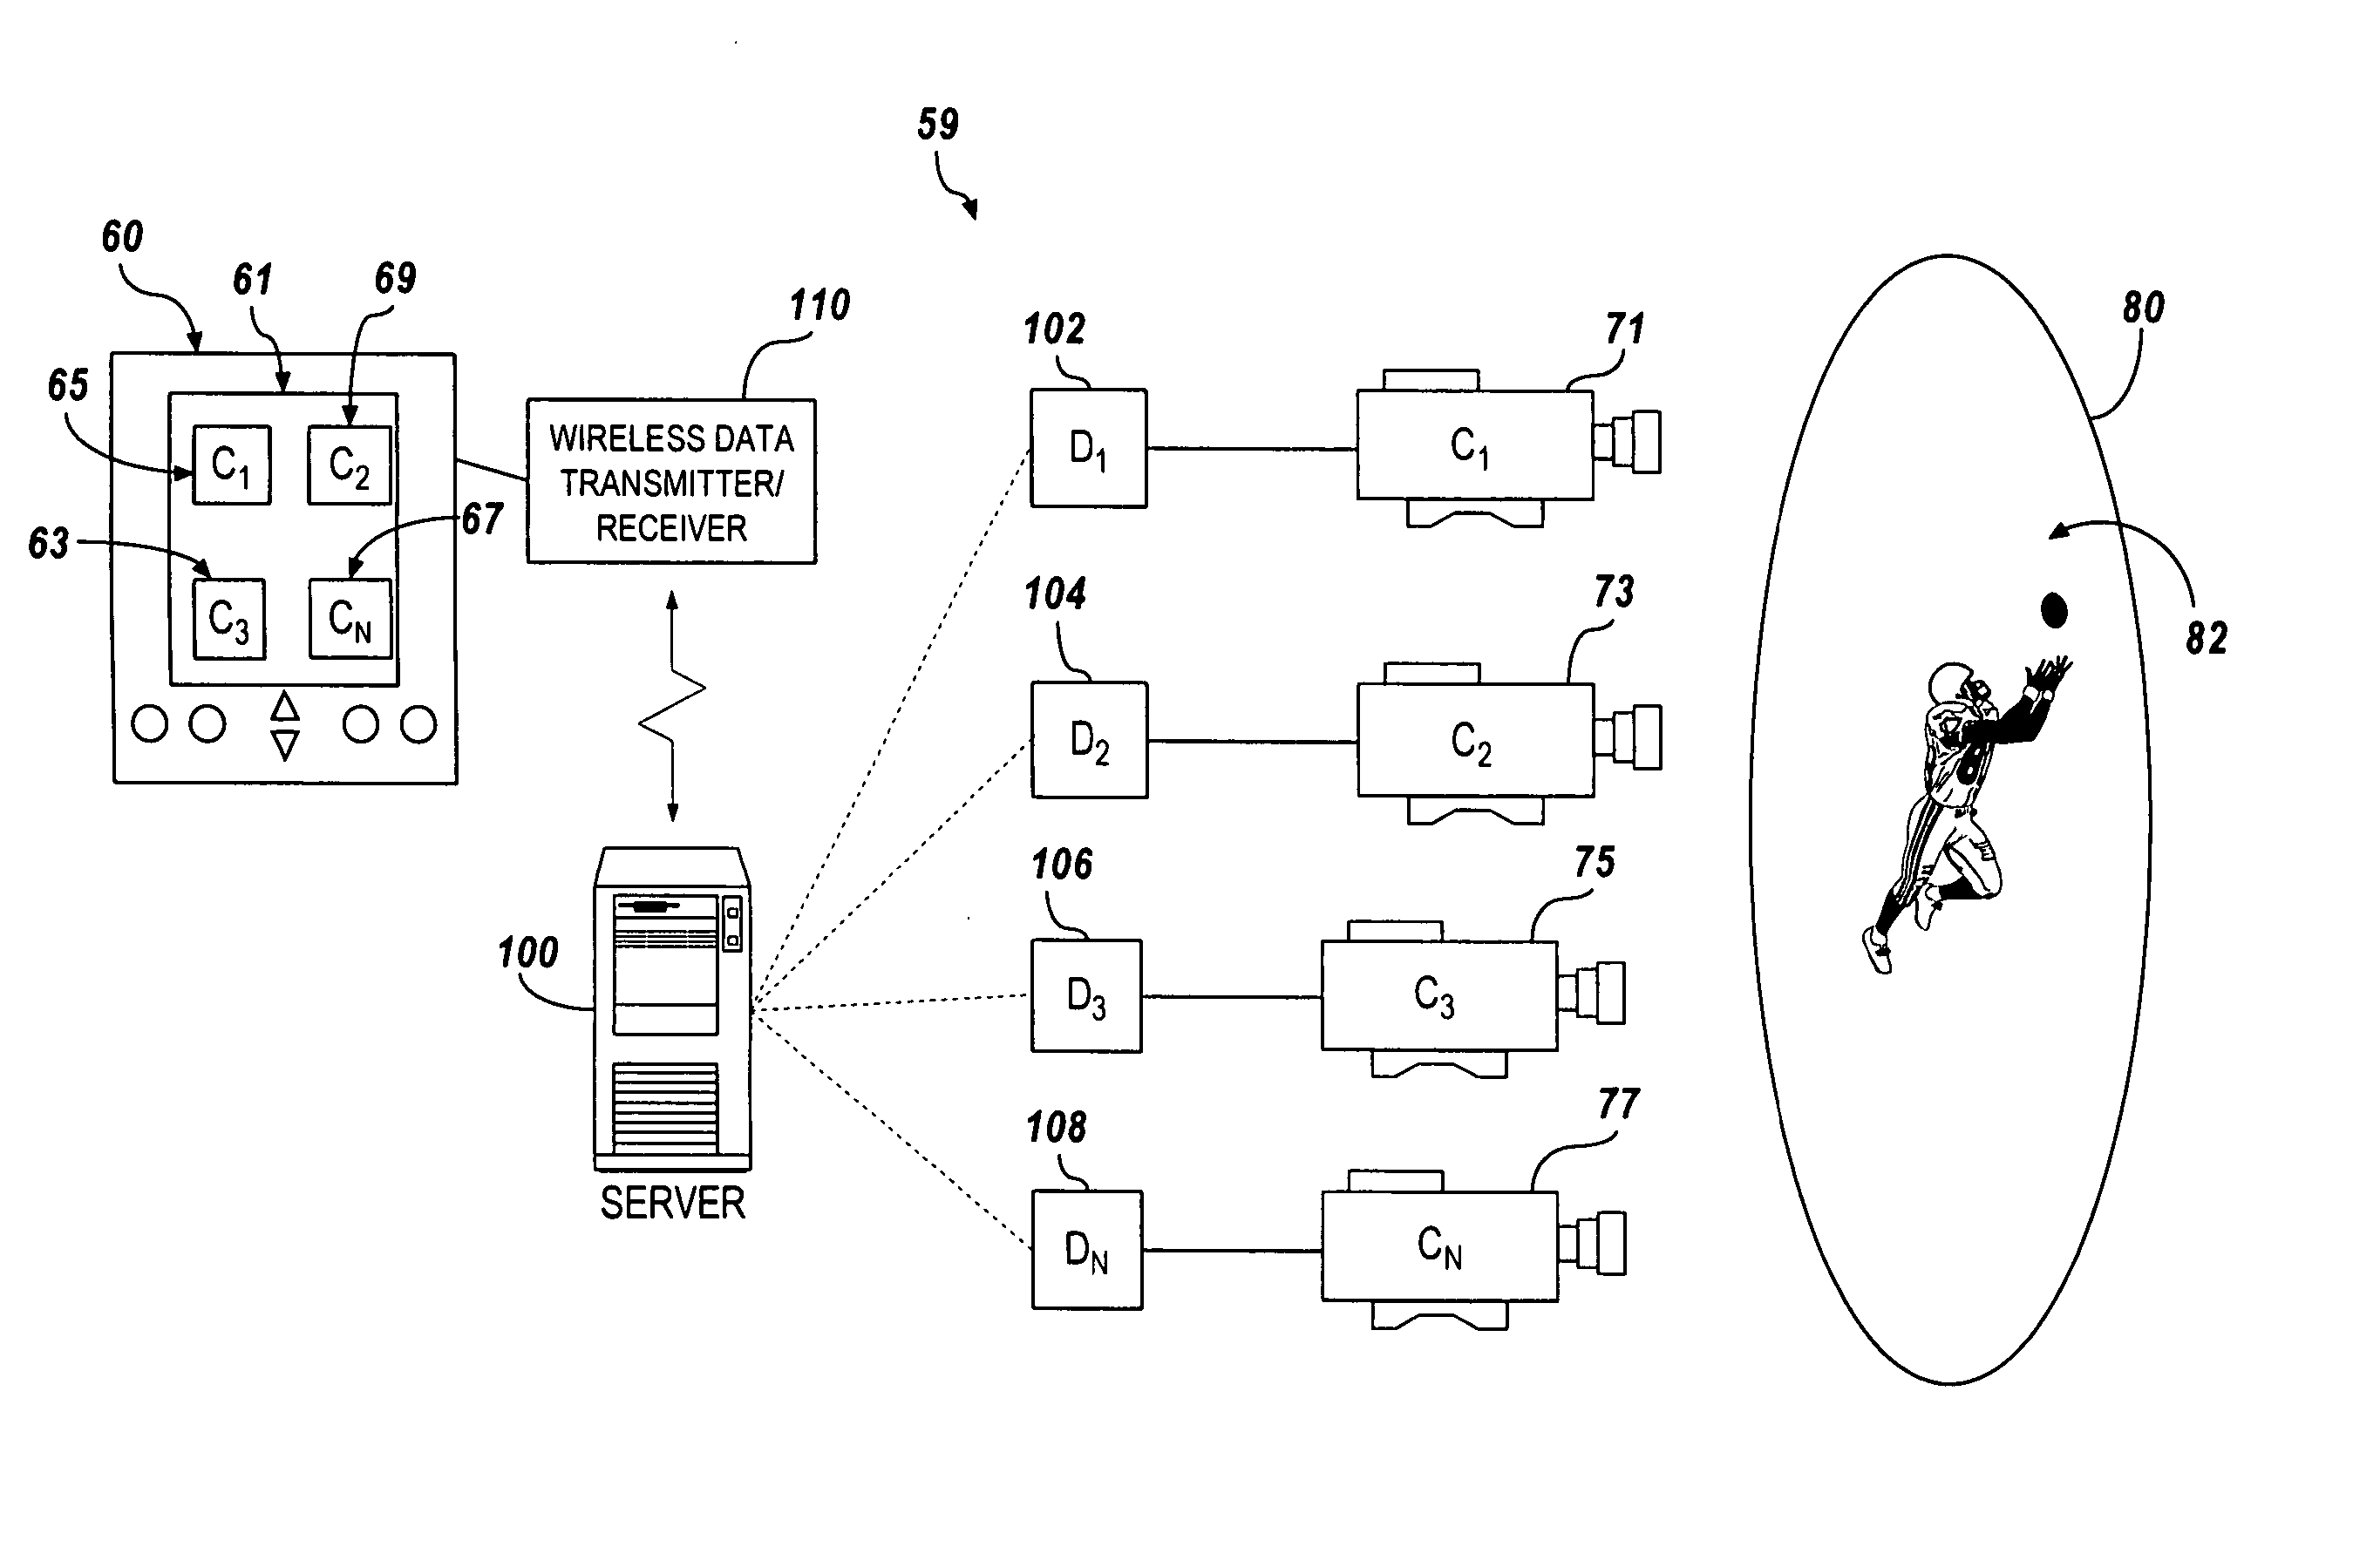 Broadcasting venue data to a wireless hand held device